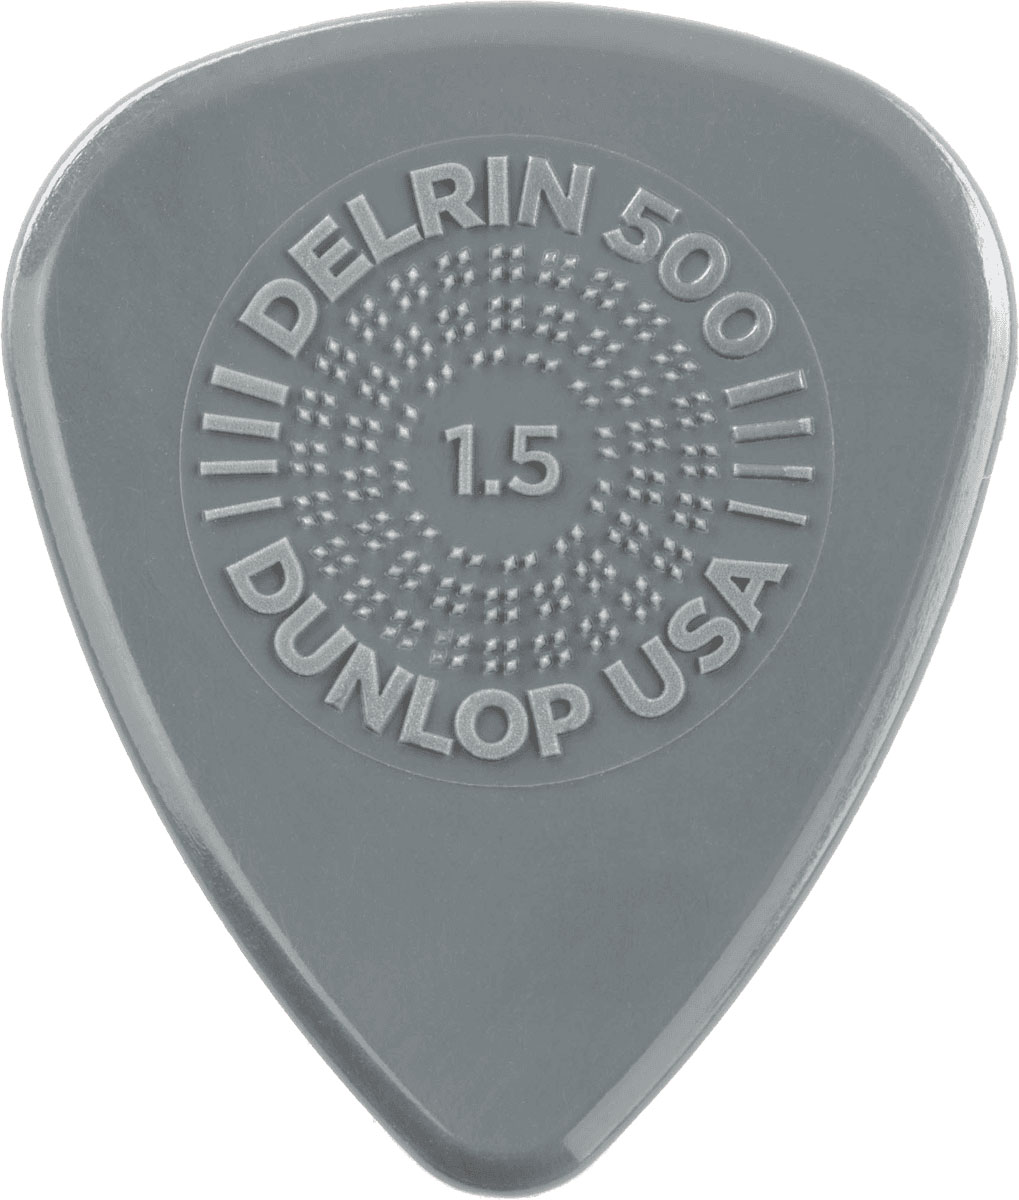 JIM DUNLOP SPECIALTY DELRIN 500 PRIME GRIP 1,50MM X 12